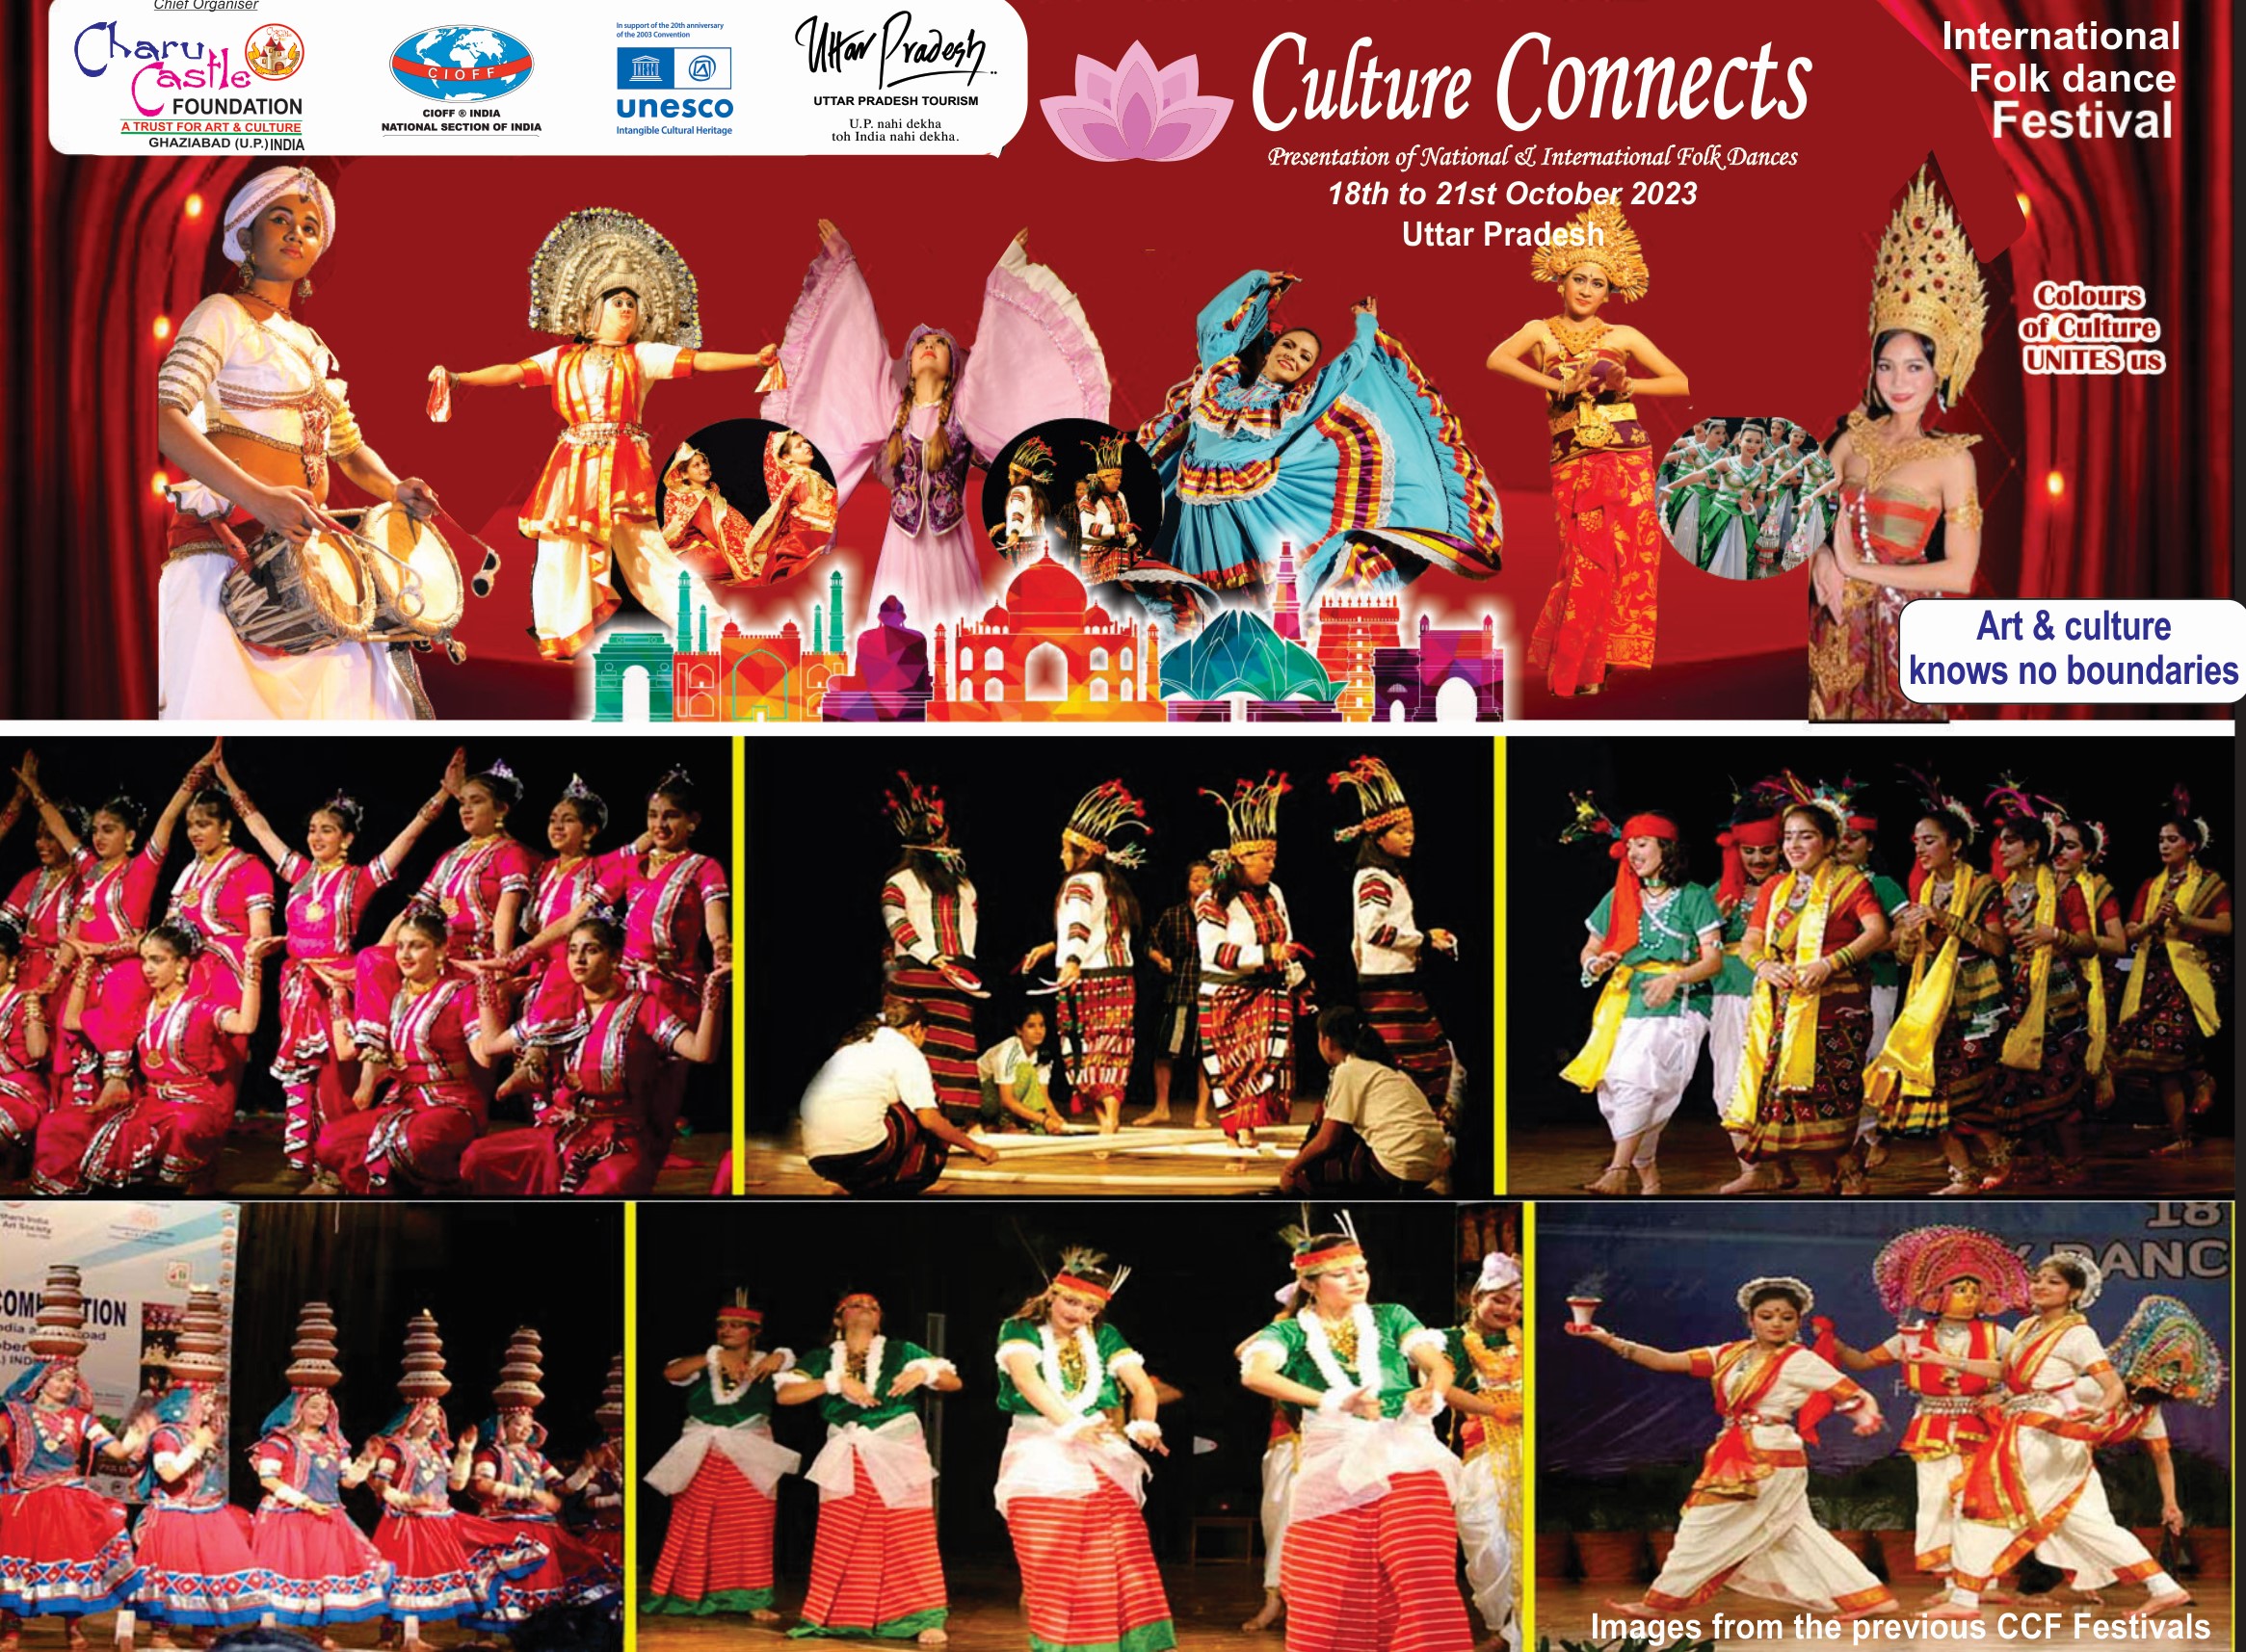 International Folk Dance Festival “ Culture Connects” 18th to 21st October 2023 